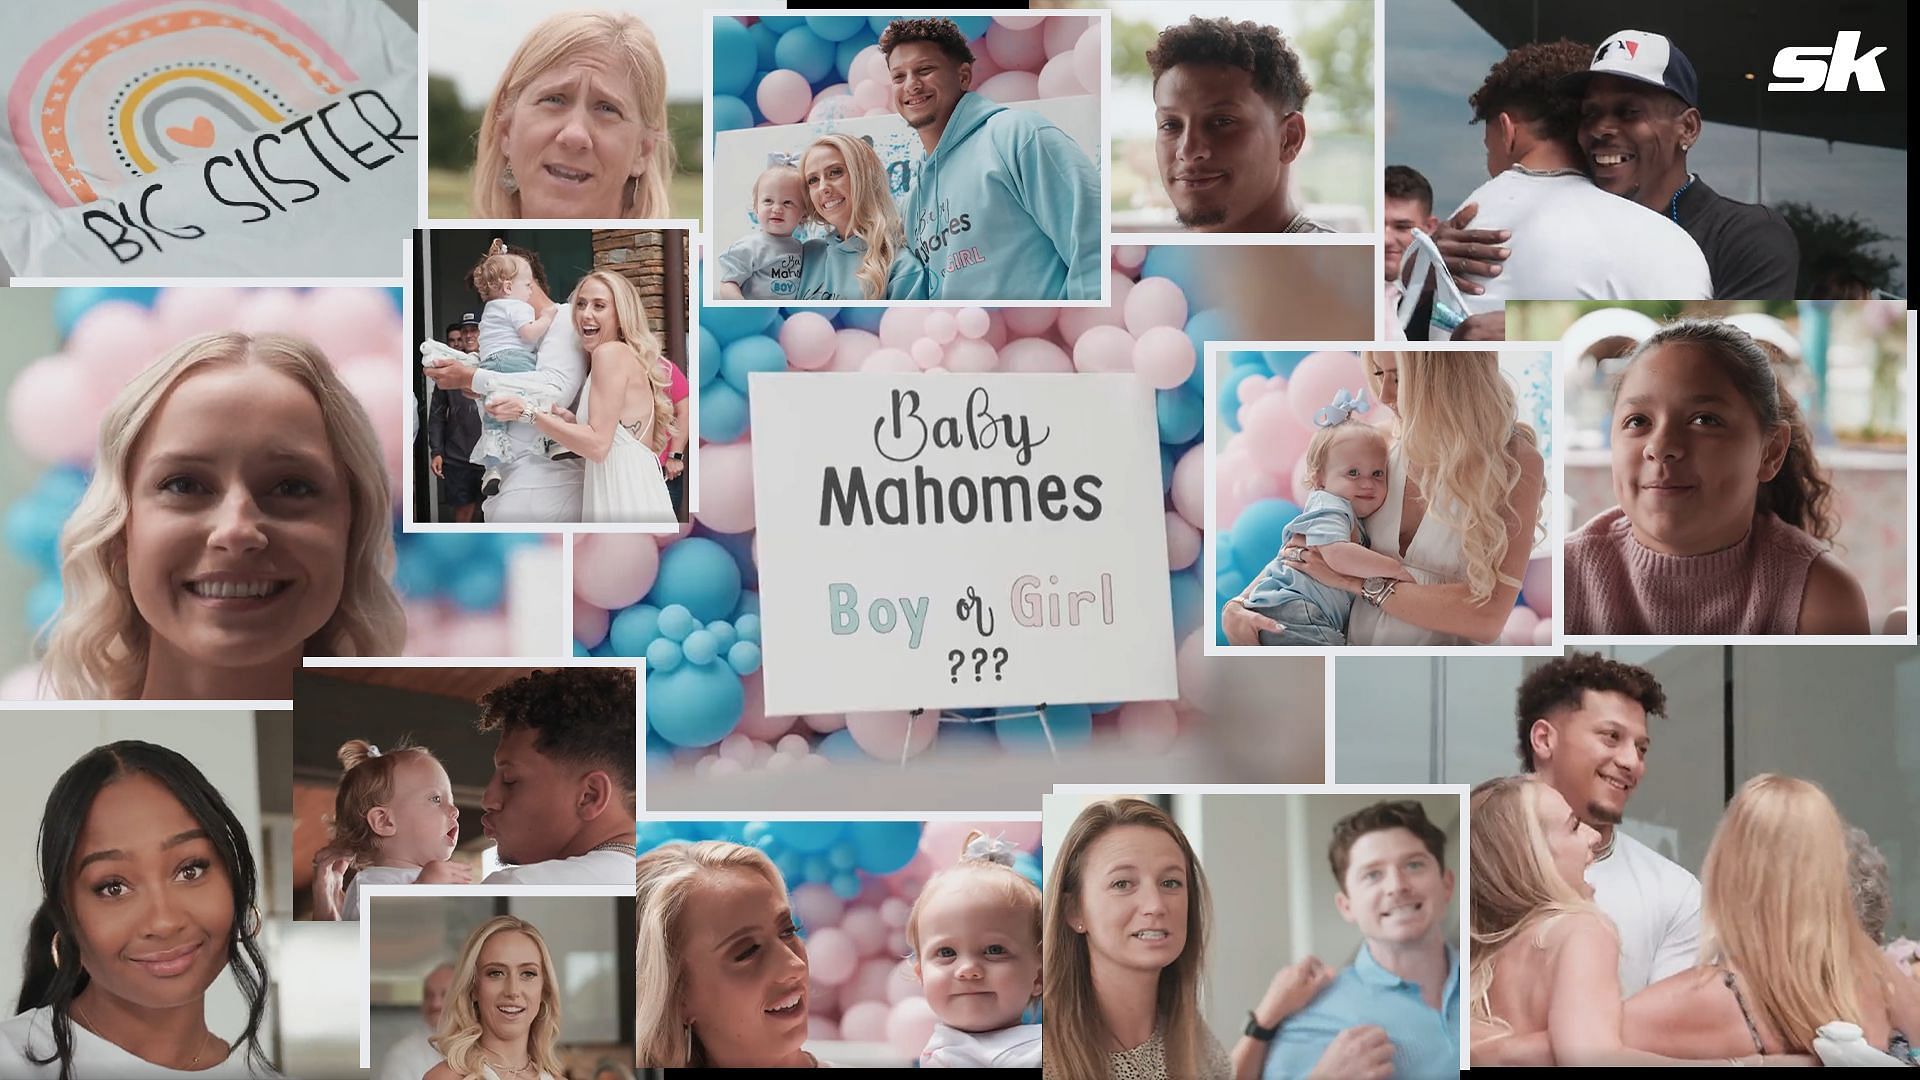 Patrick Mahomes and wife Brittany Matthews reveal the gender of their new child | Image Credit: Patrick Mahomes/IG